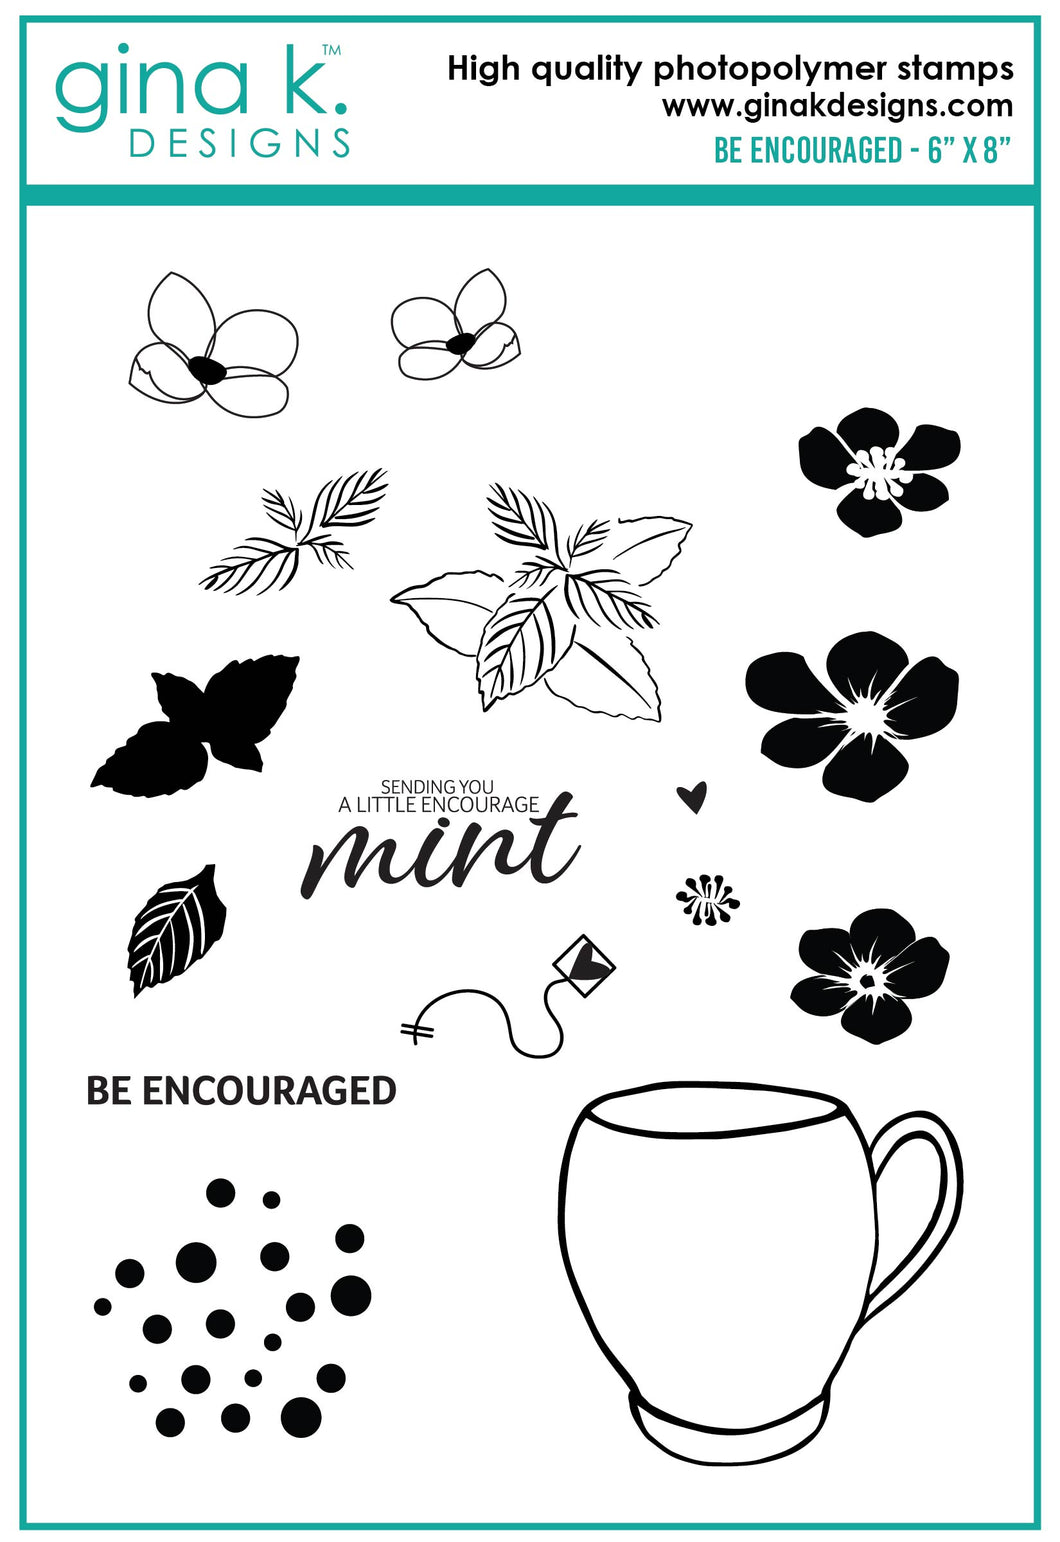 Gina K. designs - Stamps and Die Set - Be Encouraged. Be Encouraged is a stamp set by Lisa Hetrick. This set is made of premium clear photopolymer and measures 6